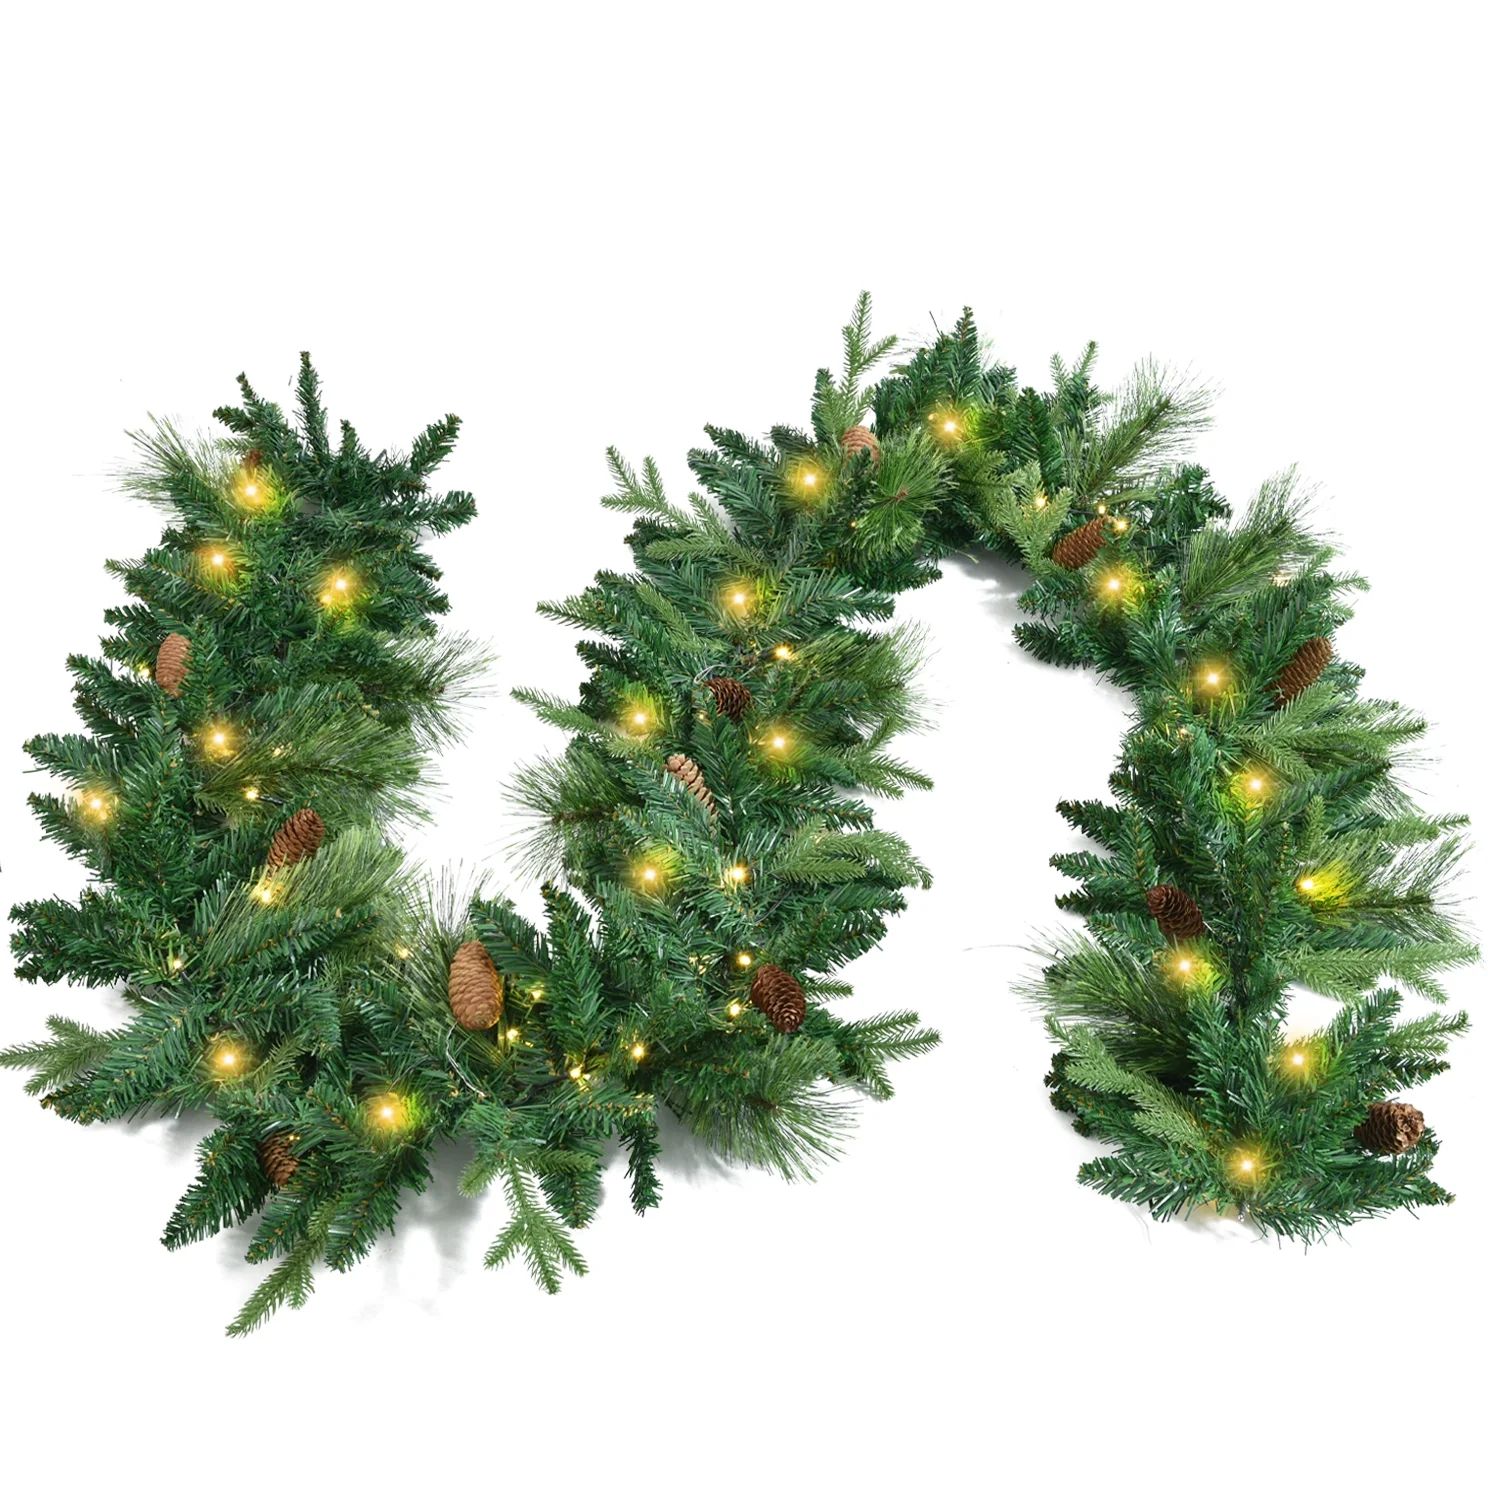 Longrv 9 FT Prelit Christmas Garland Indoor Decorations with 50 LED Warm Lights, Battery Operated... | Walmart (US)